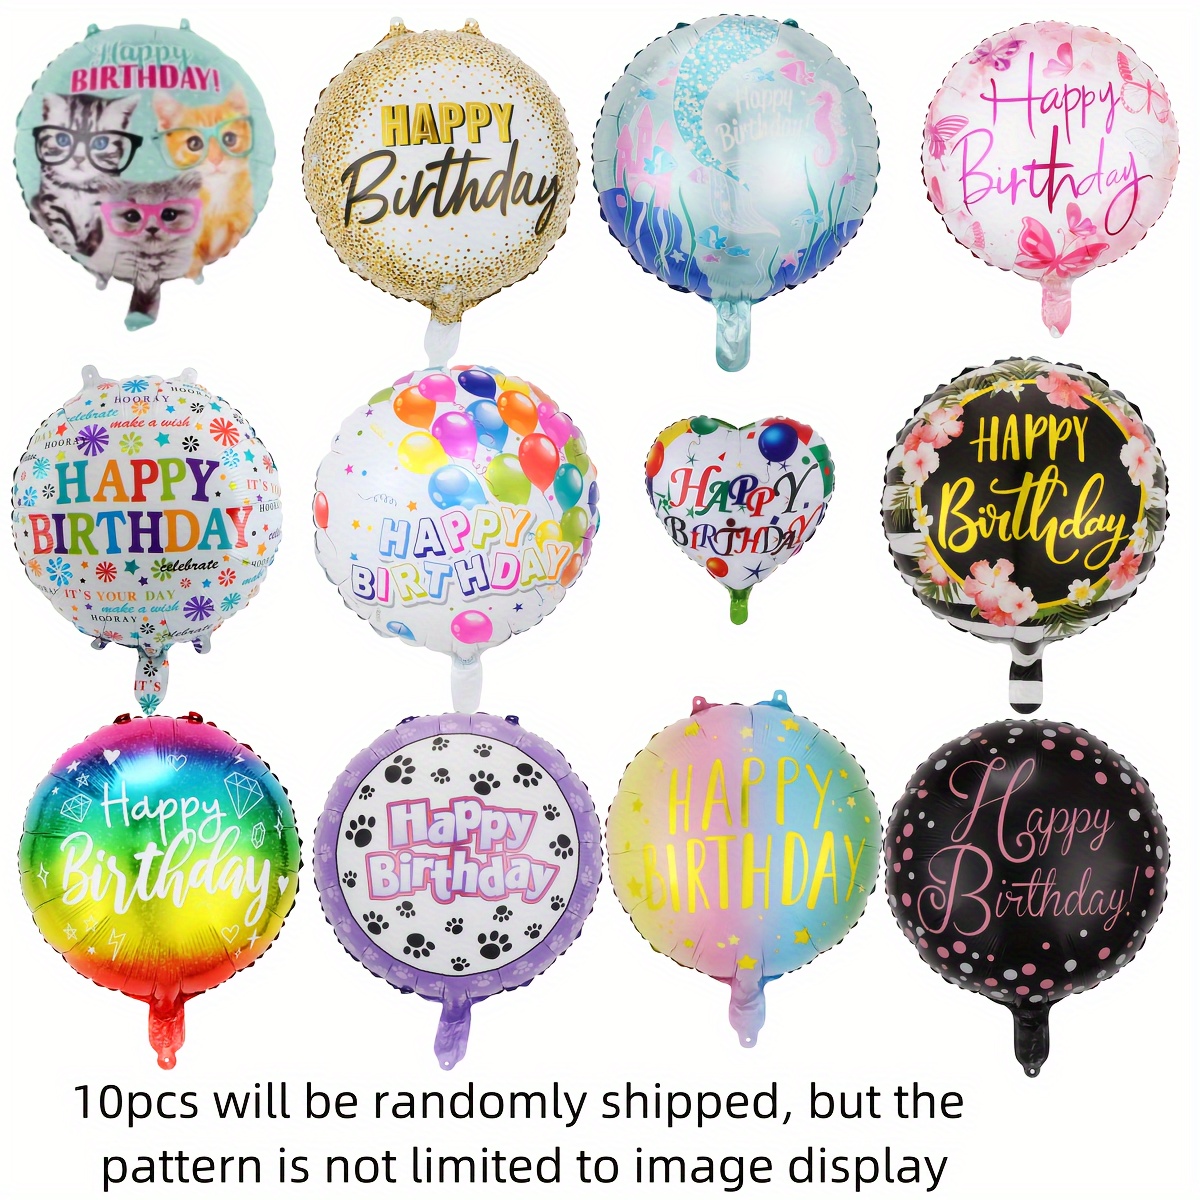 

10pcs Happy Birthday Balloons Set - Round Aluminum Film 18" Party Essentials For Birthdays, Father's Day, Graduation, Spring, Summer, Fall - Colorful Celebration Decorations For Ages 14+